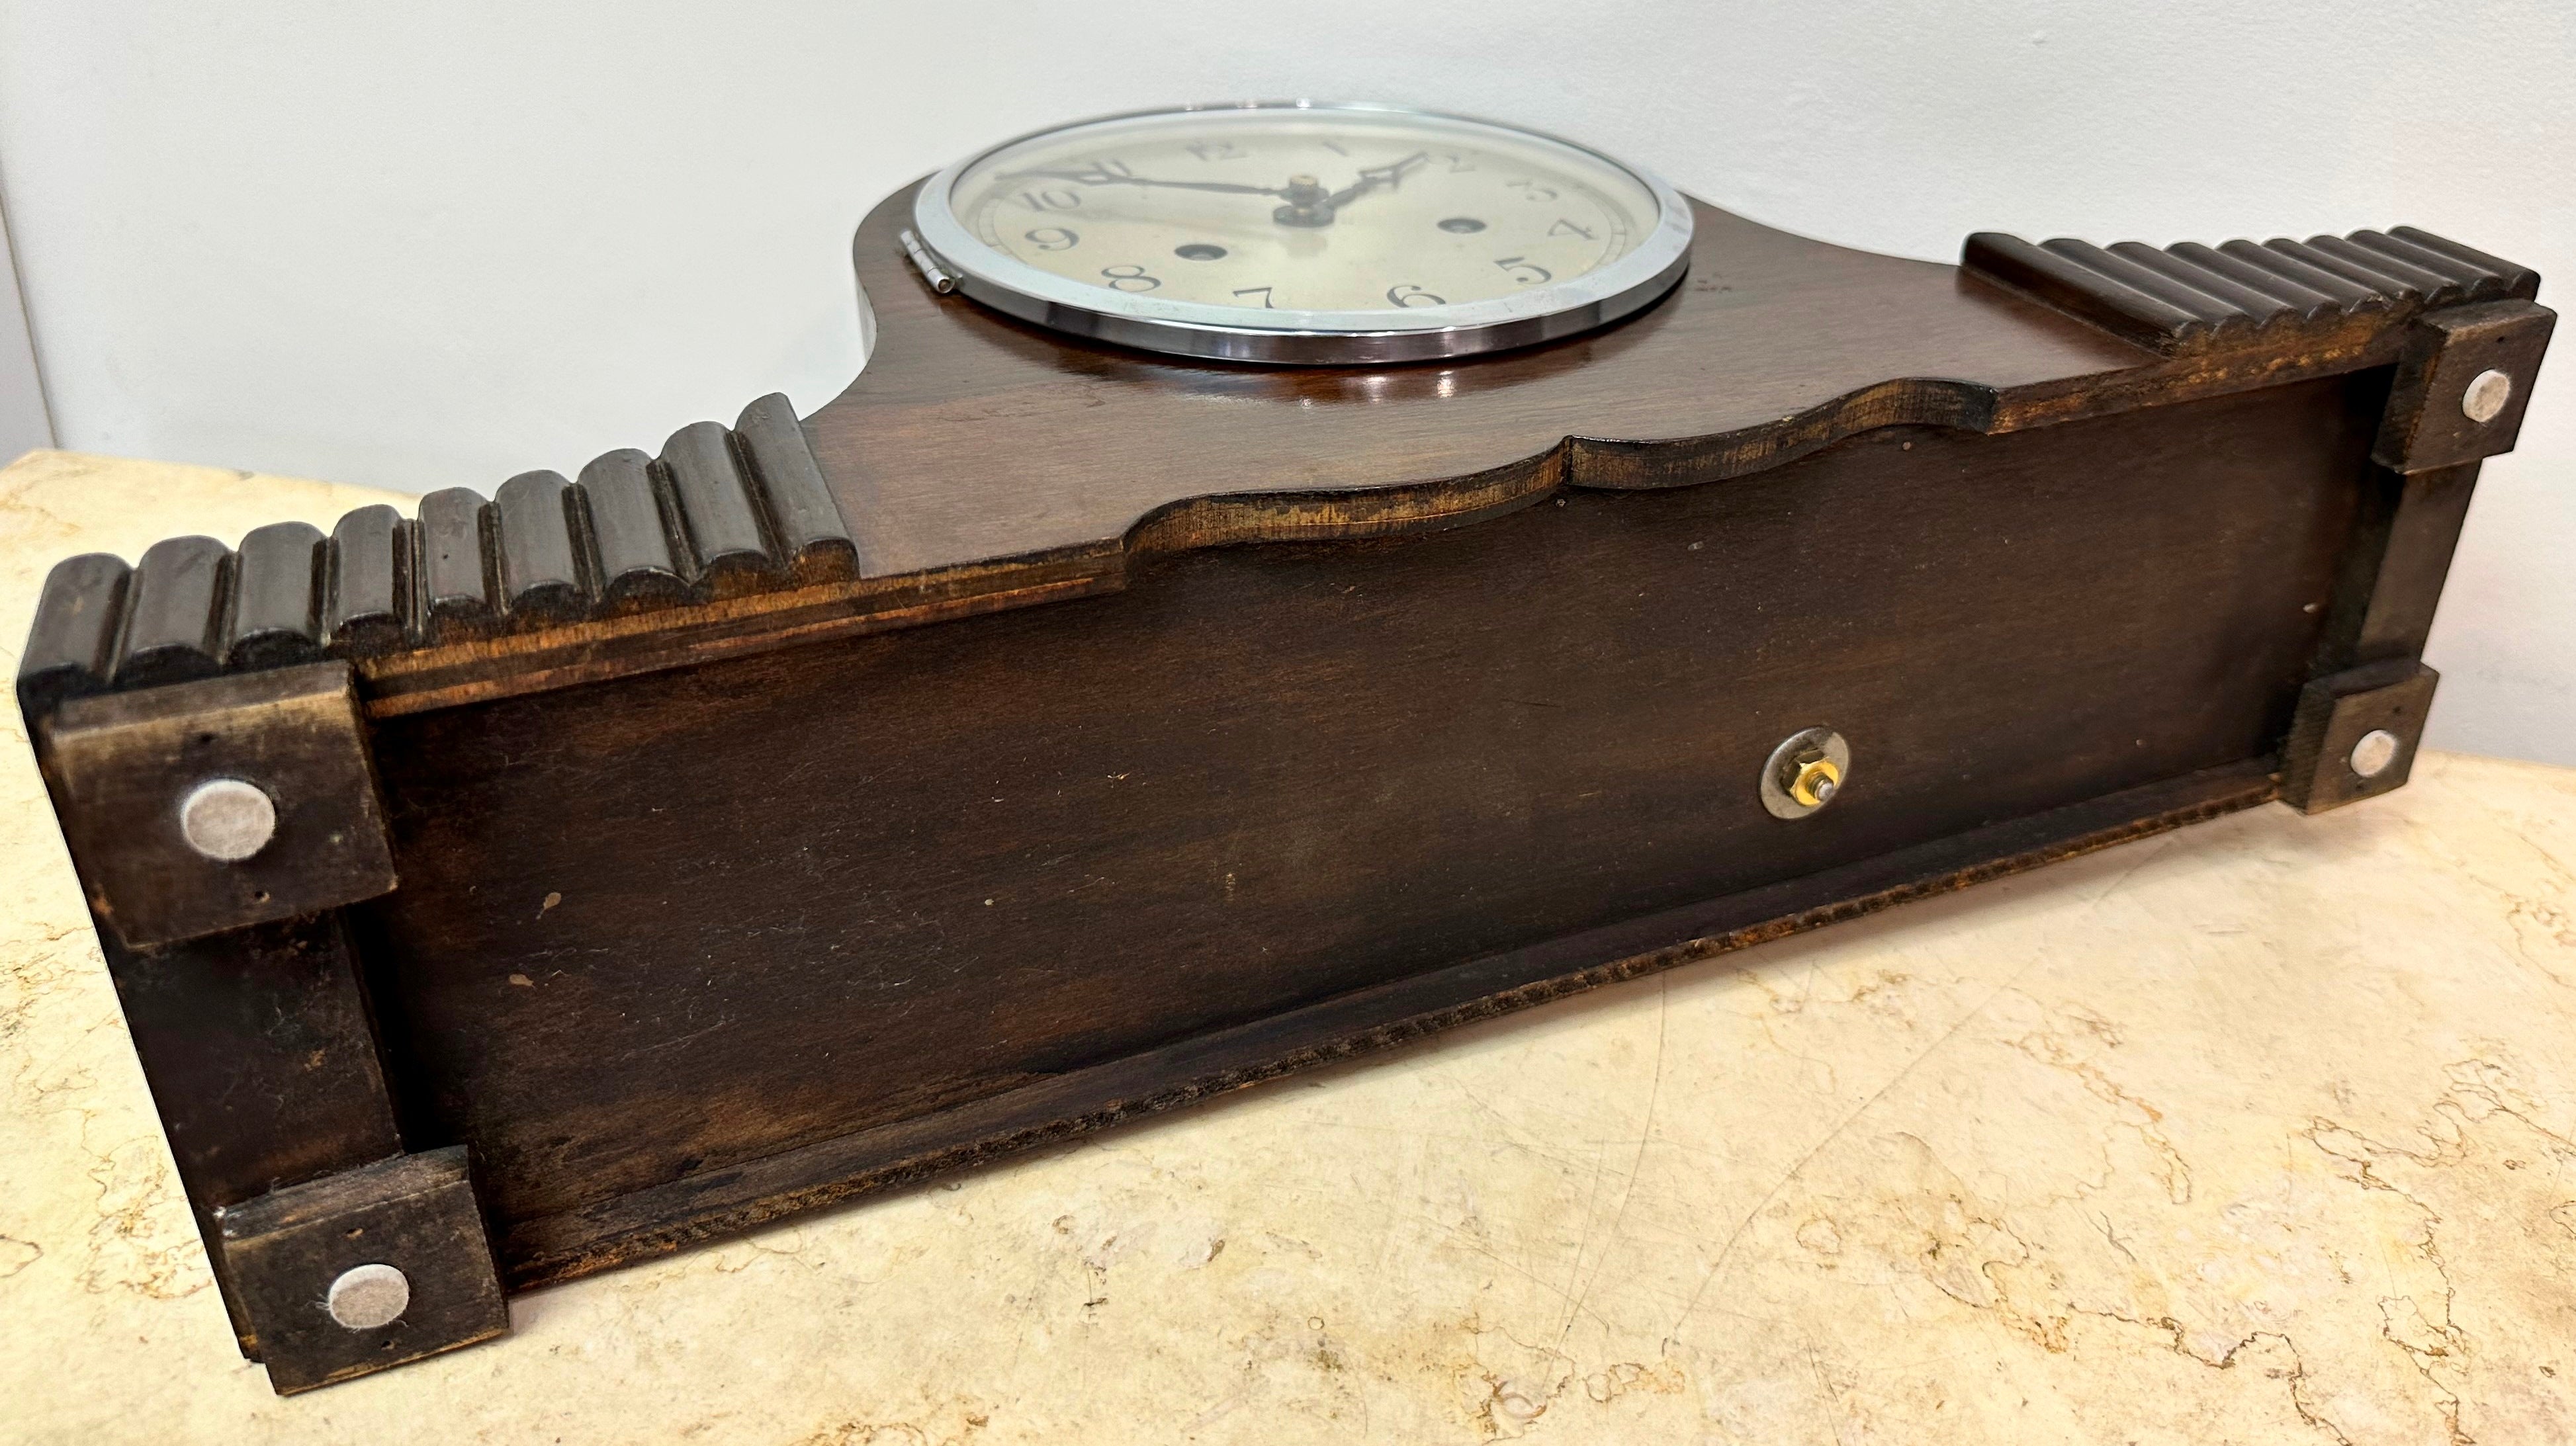 Vintage Napoleon Style Hammer on Coil Chime Mantel Clock | eXibit collection